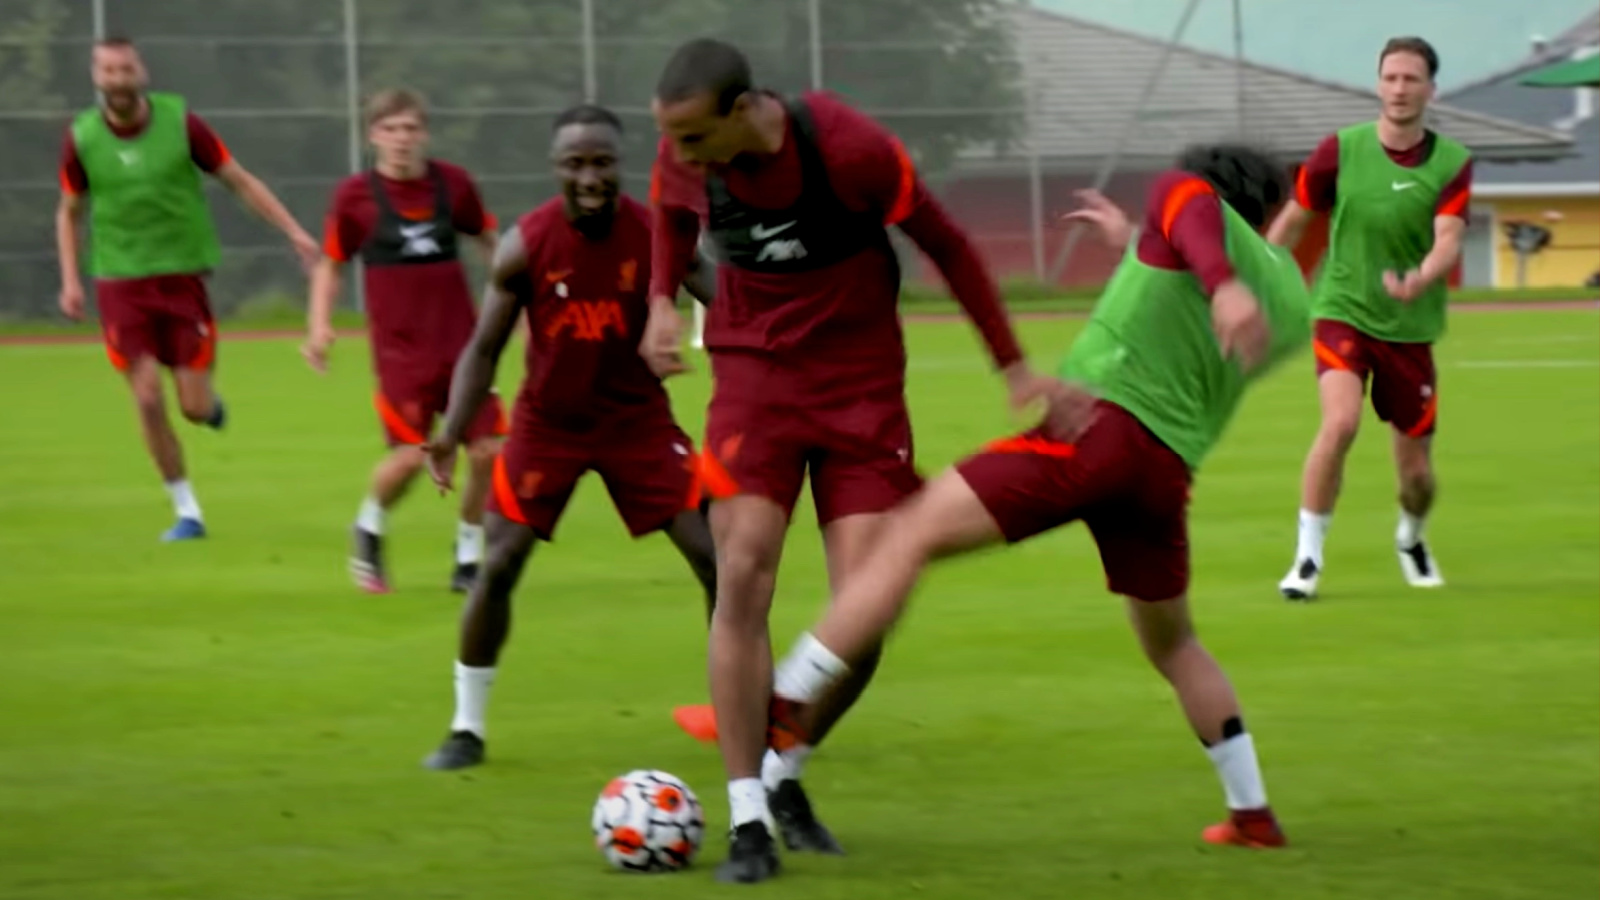 Joel Matip shoves Takumi Minamino out of his way before going on a run in training